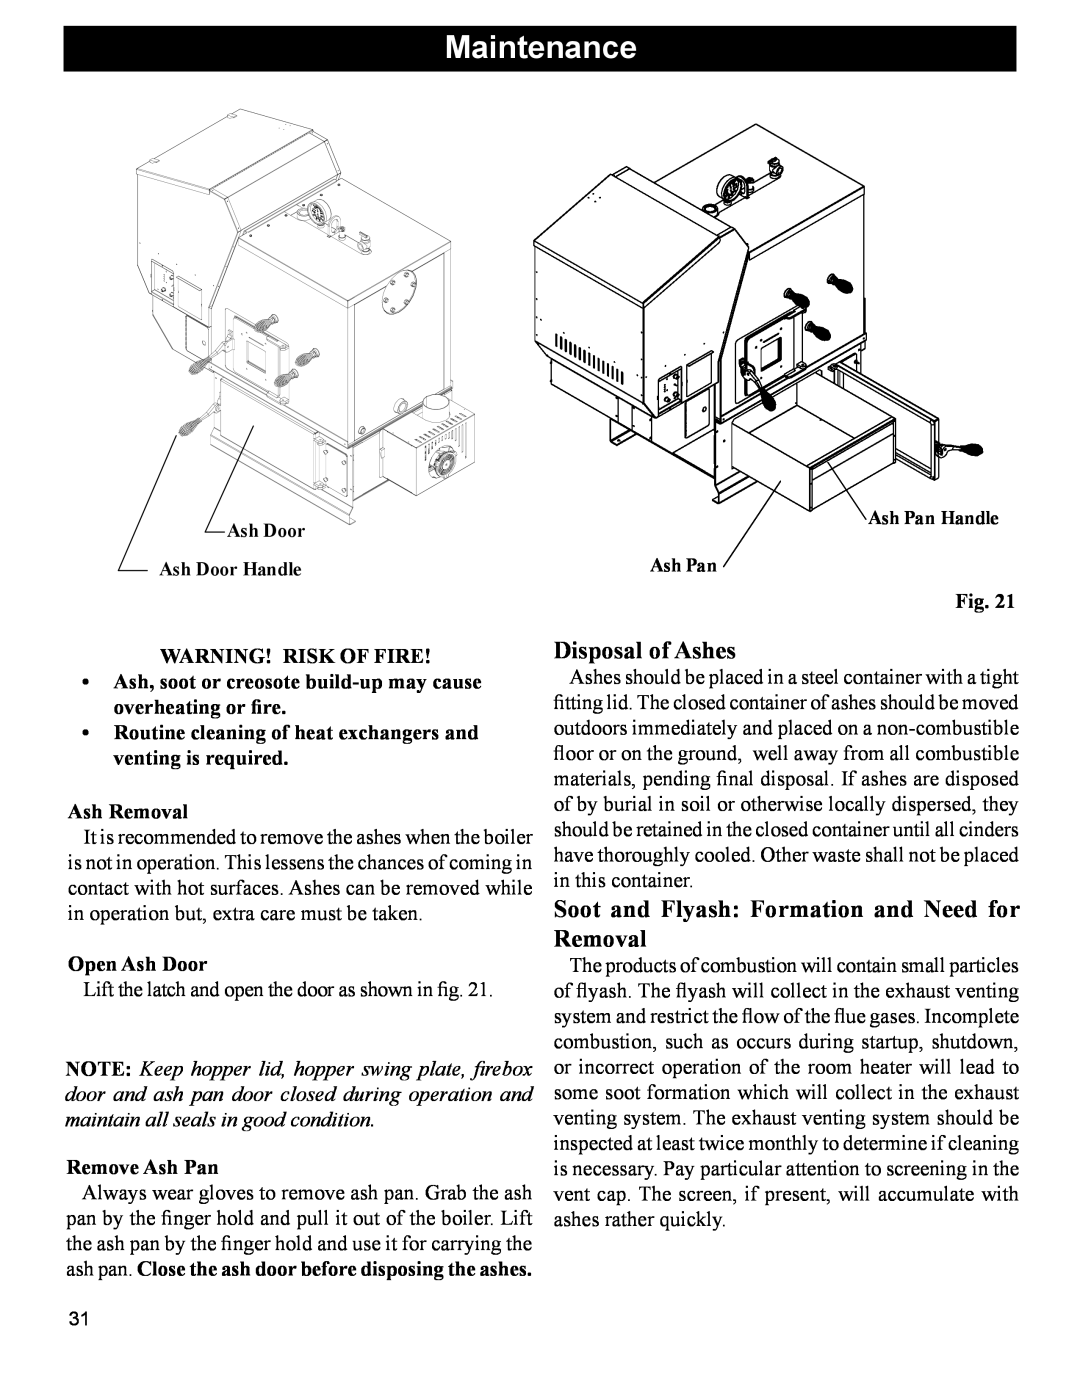 Hearth and Home Technologies BH 105 manual Maintenance, Warning! Risk of Fire, Ash Removal, Open Ash Door, Remove Ash Pan 